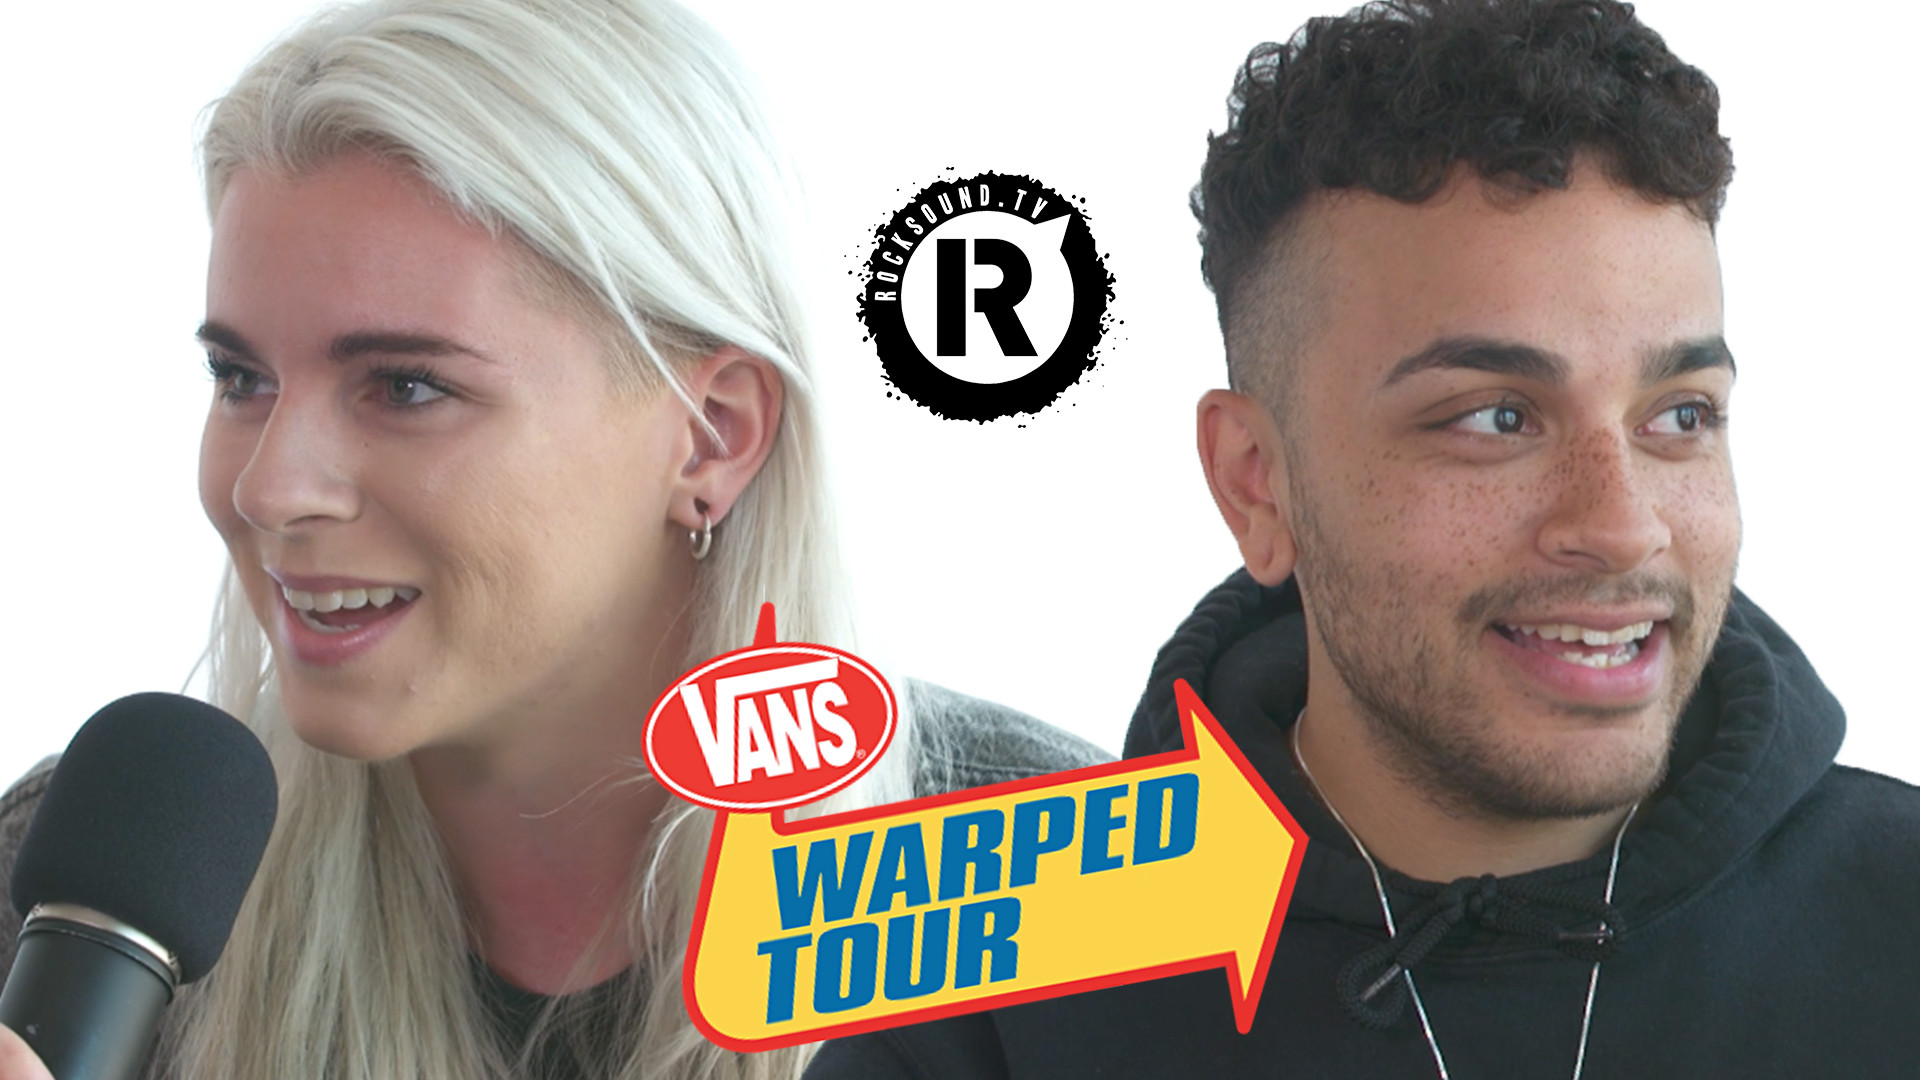 1920x1080 As Warped Tour continues it's final summer leg, we chat to two members of  PVRIS about their earliest experience of the tour.